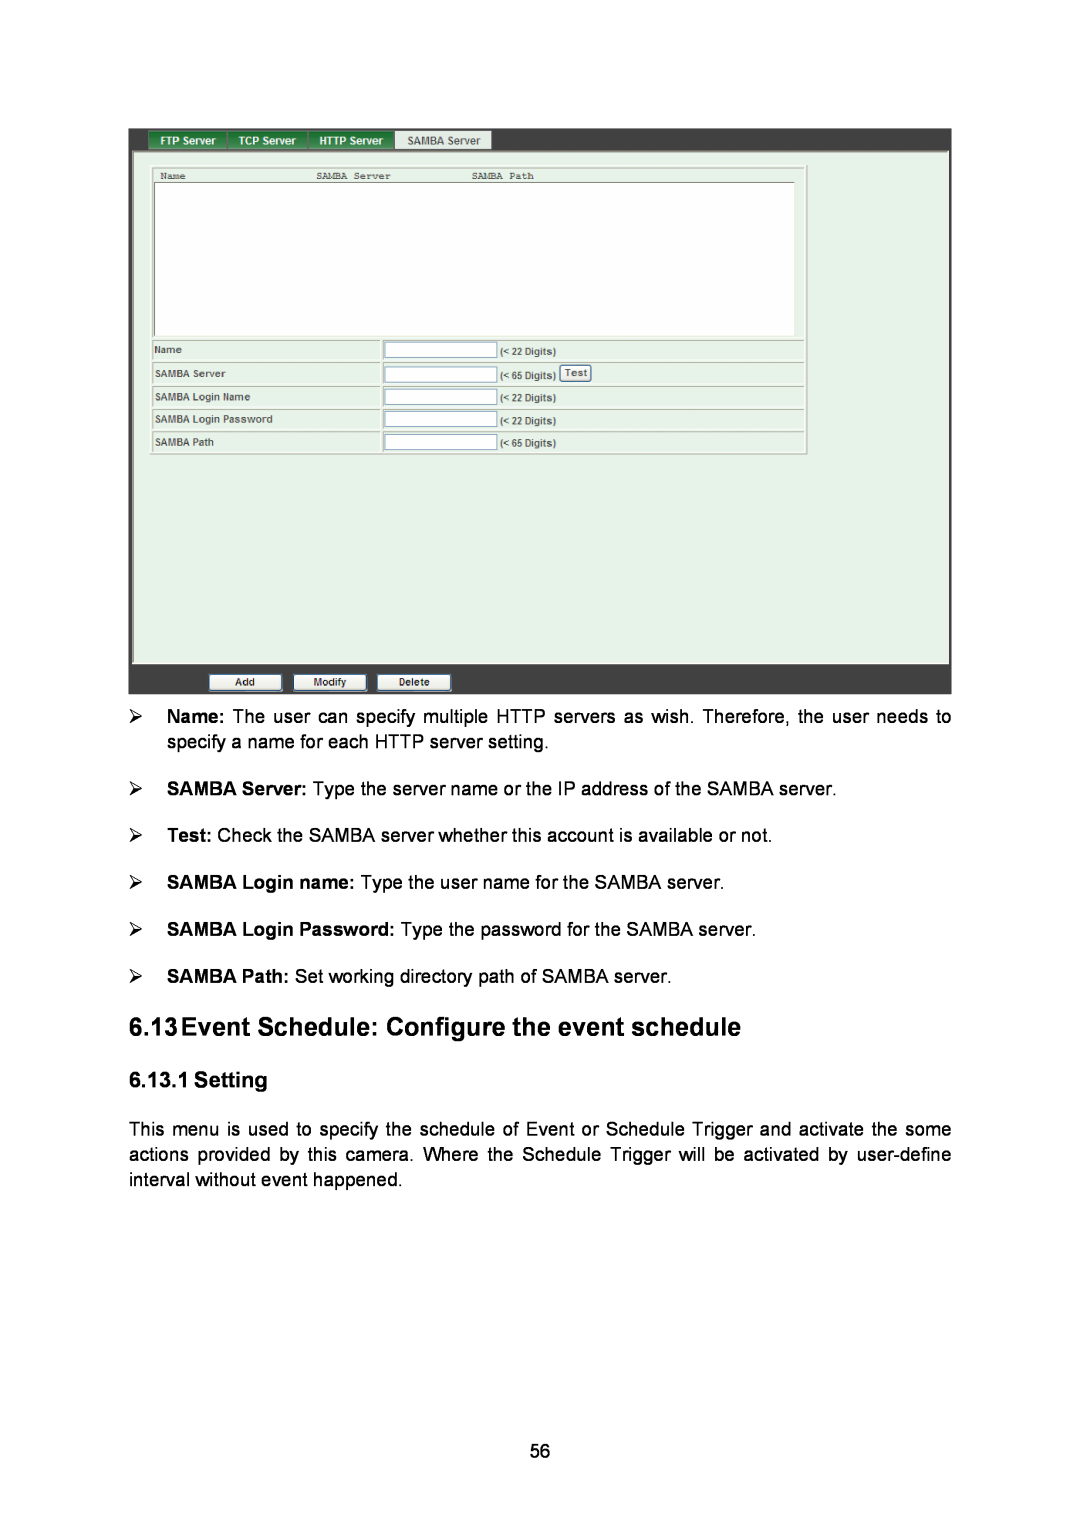 TP-Link TL-SC3230N, TL-SC323ON manual 6.13Event Schedule: Configure the event schedule, Setting 